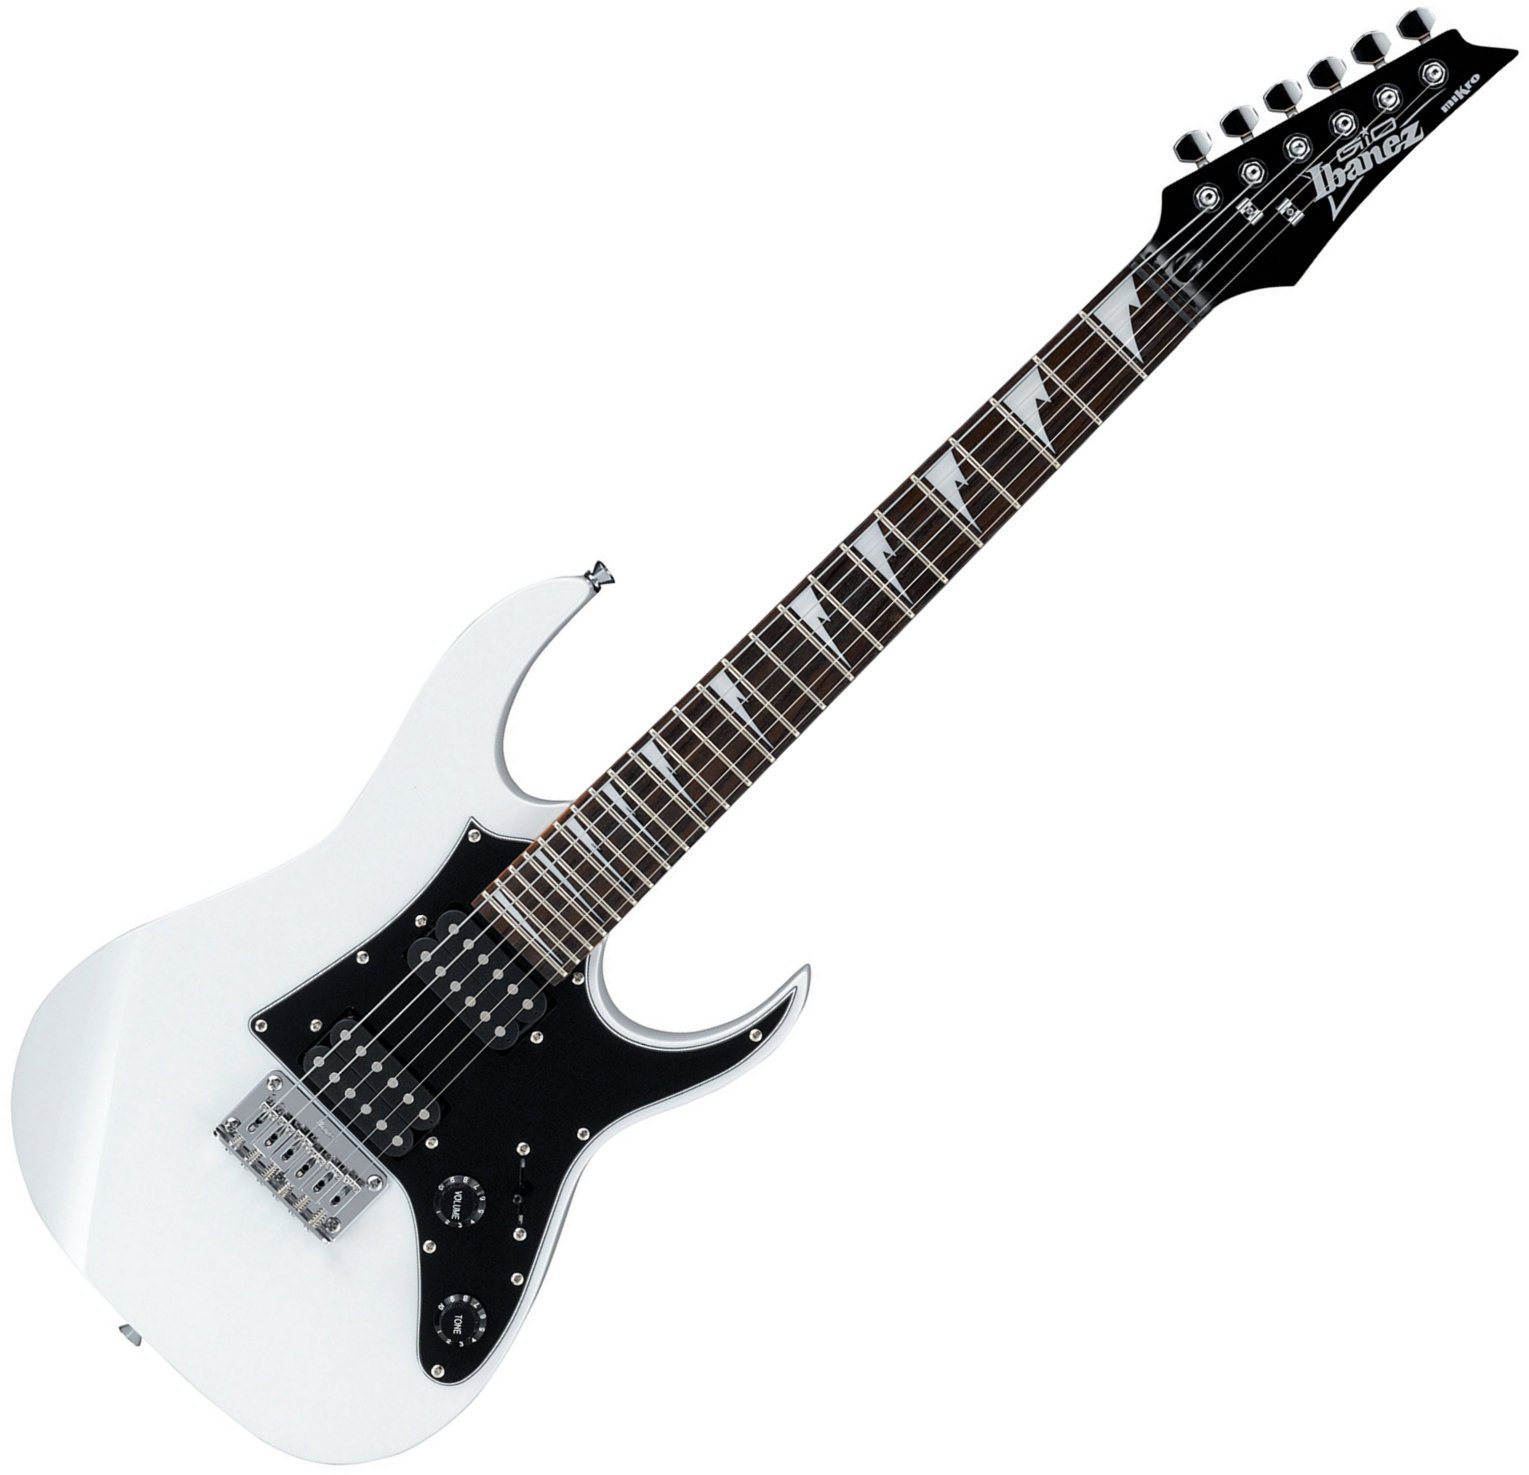 Electric guitar Ibanez GRGM21-WH White